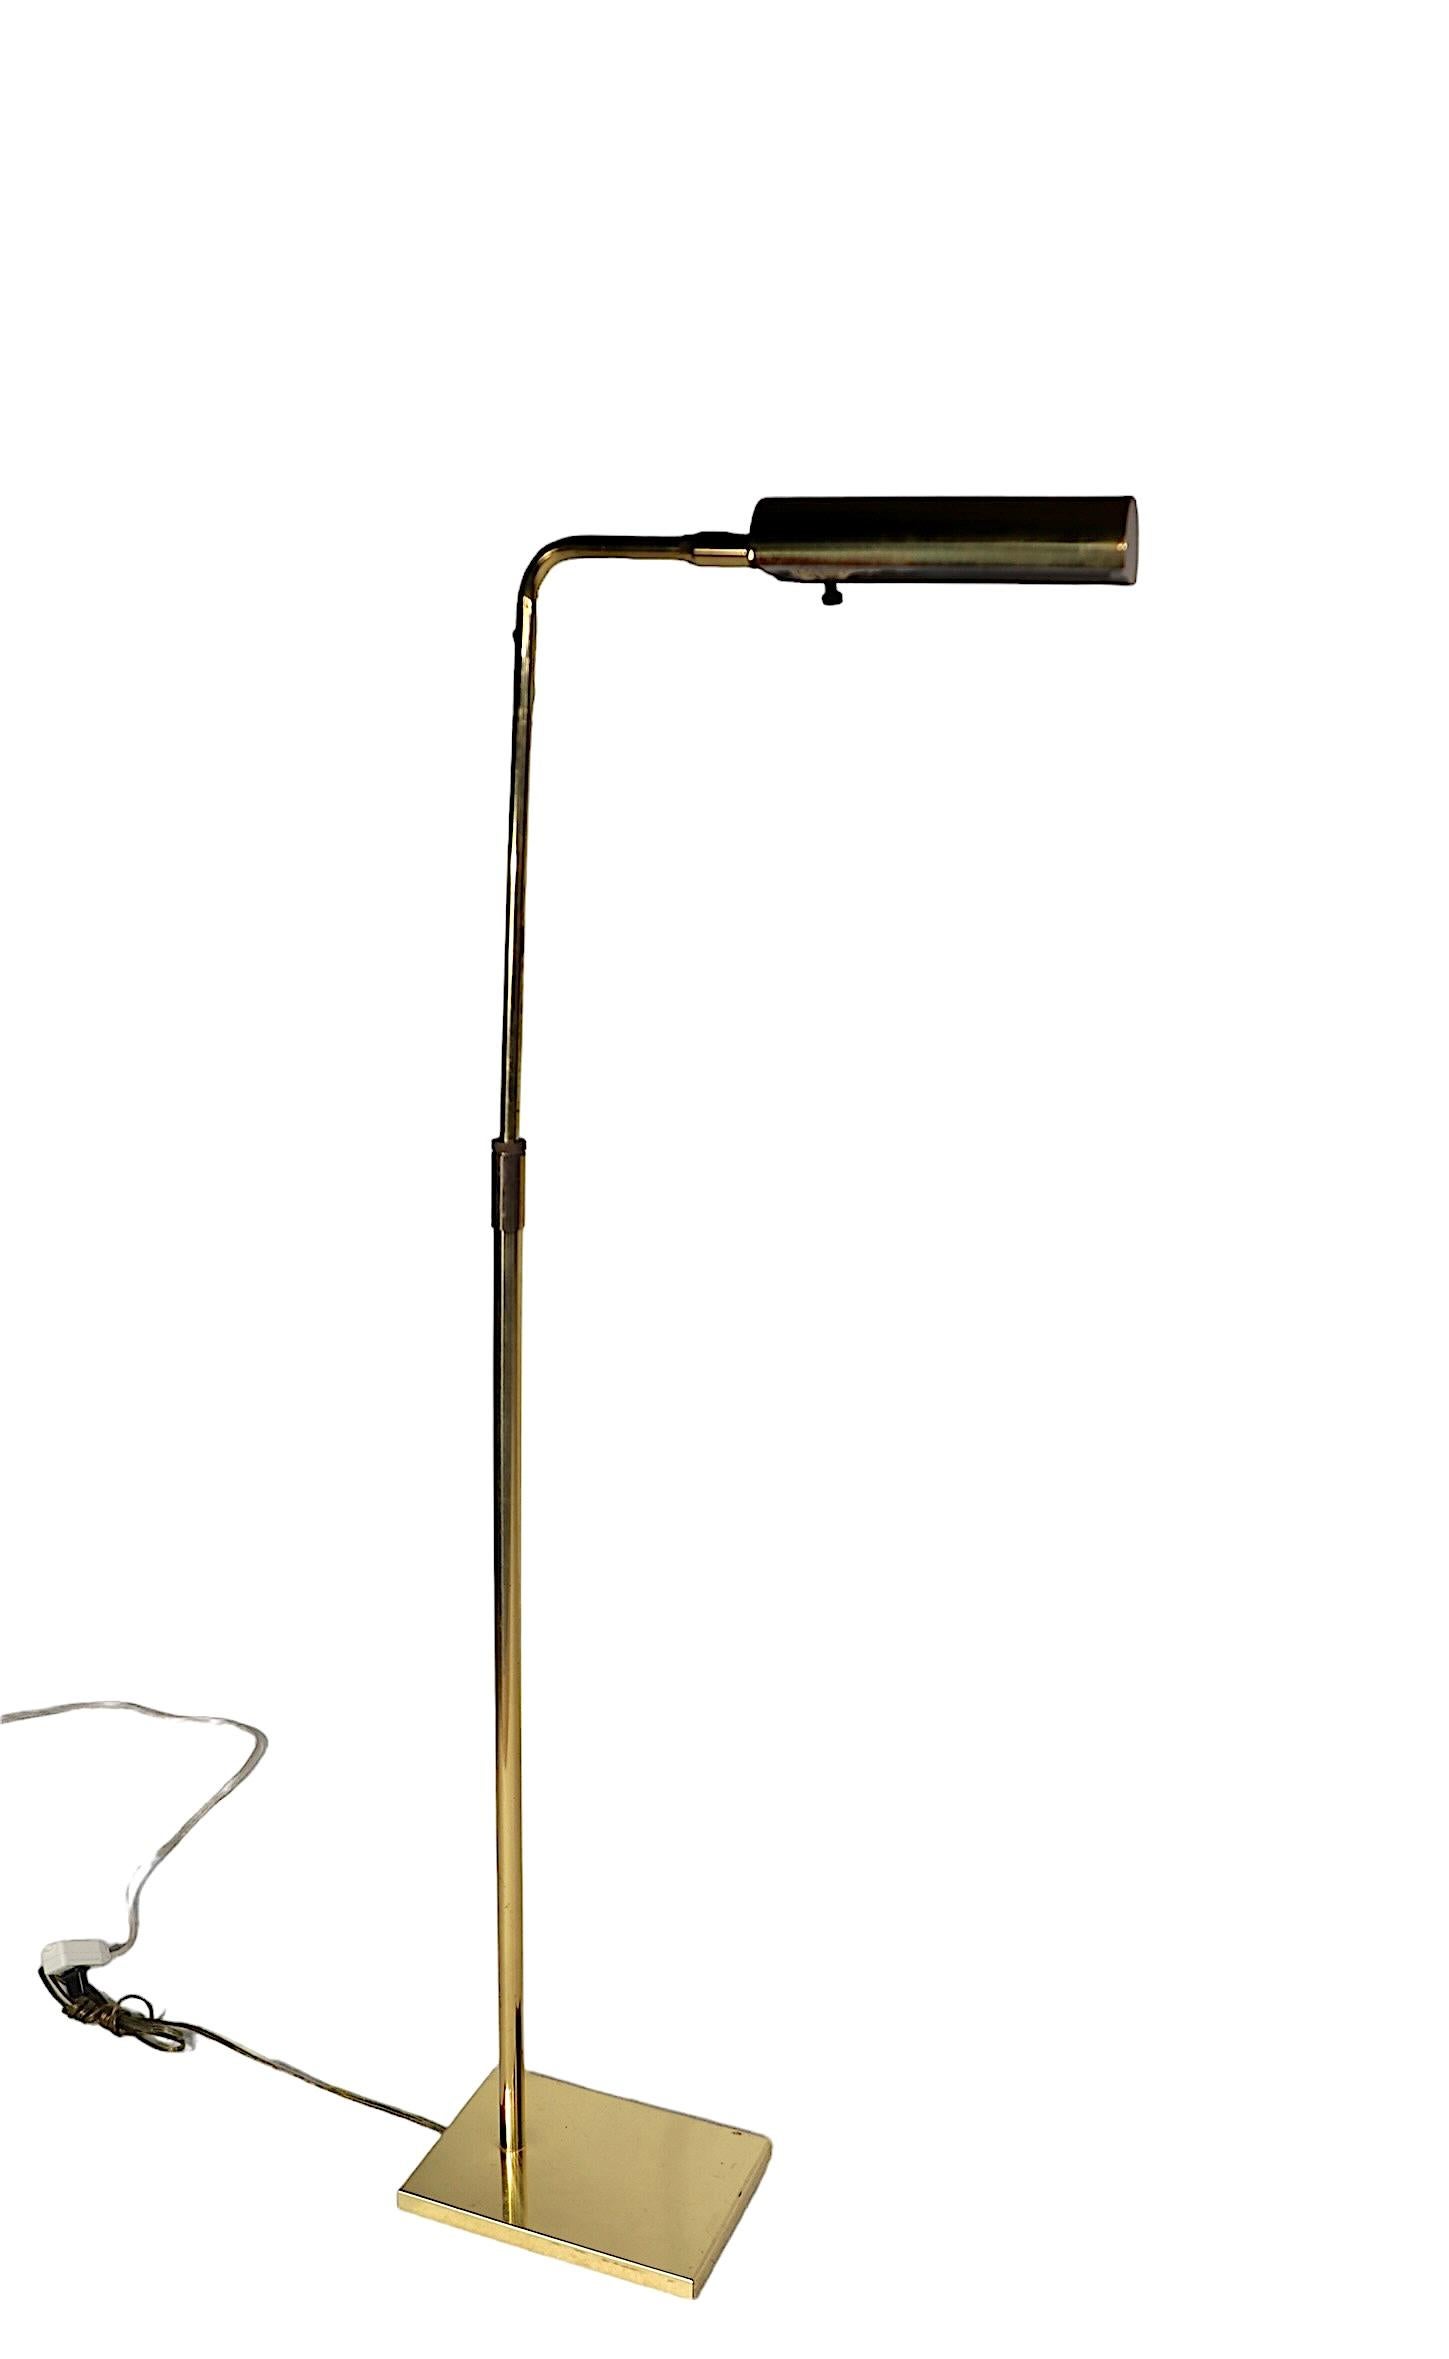  Koch & Lowy Pharmacy Floor Lamp in Brass c 1950/60's  In Good Condition For Sale In New York, NY